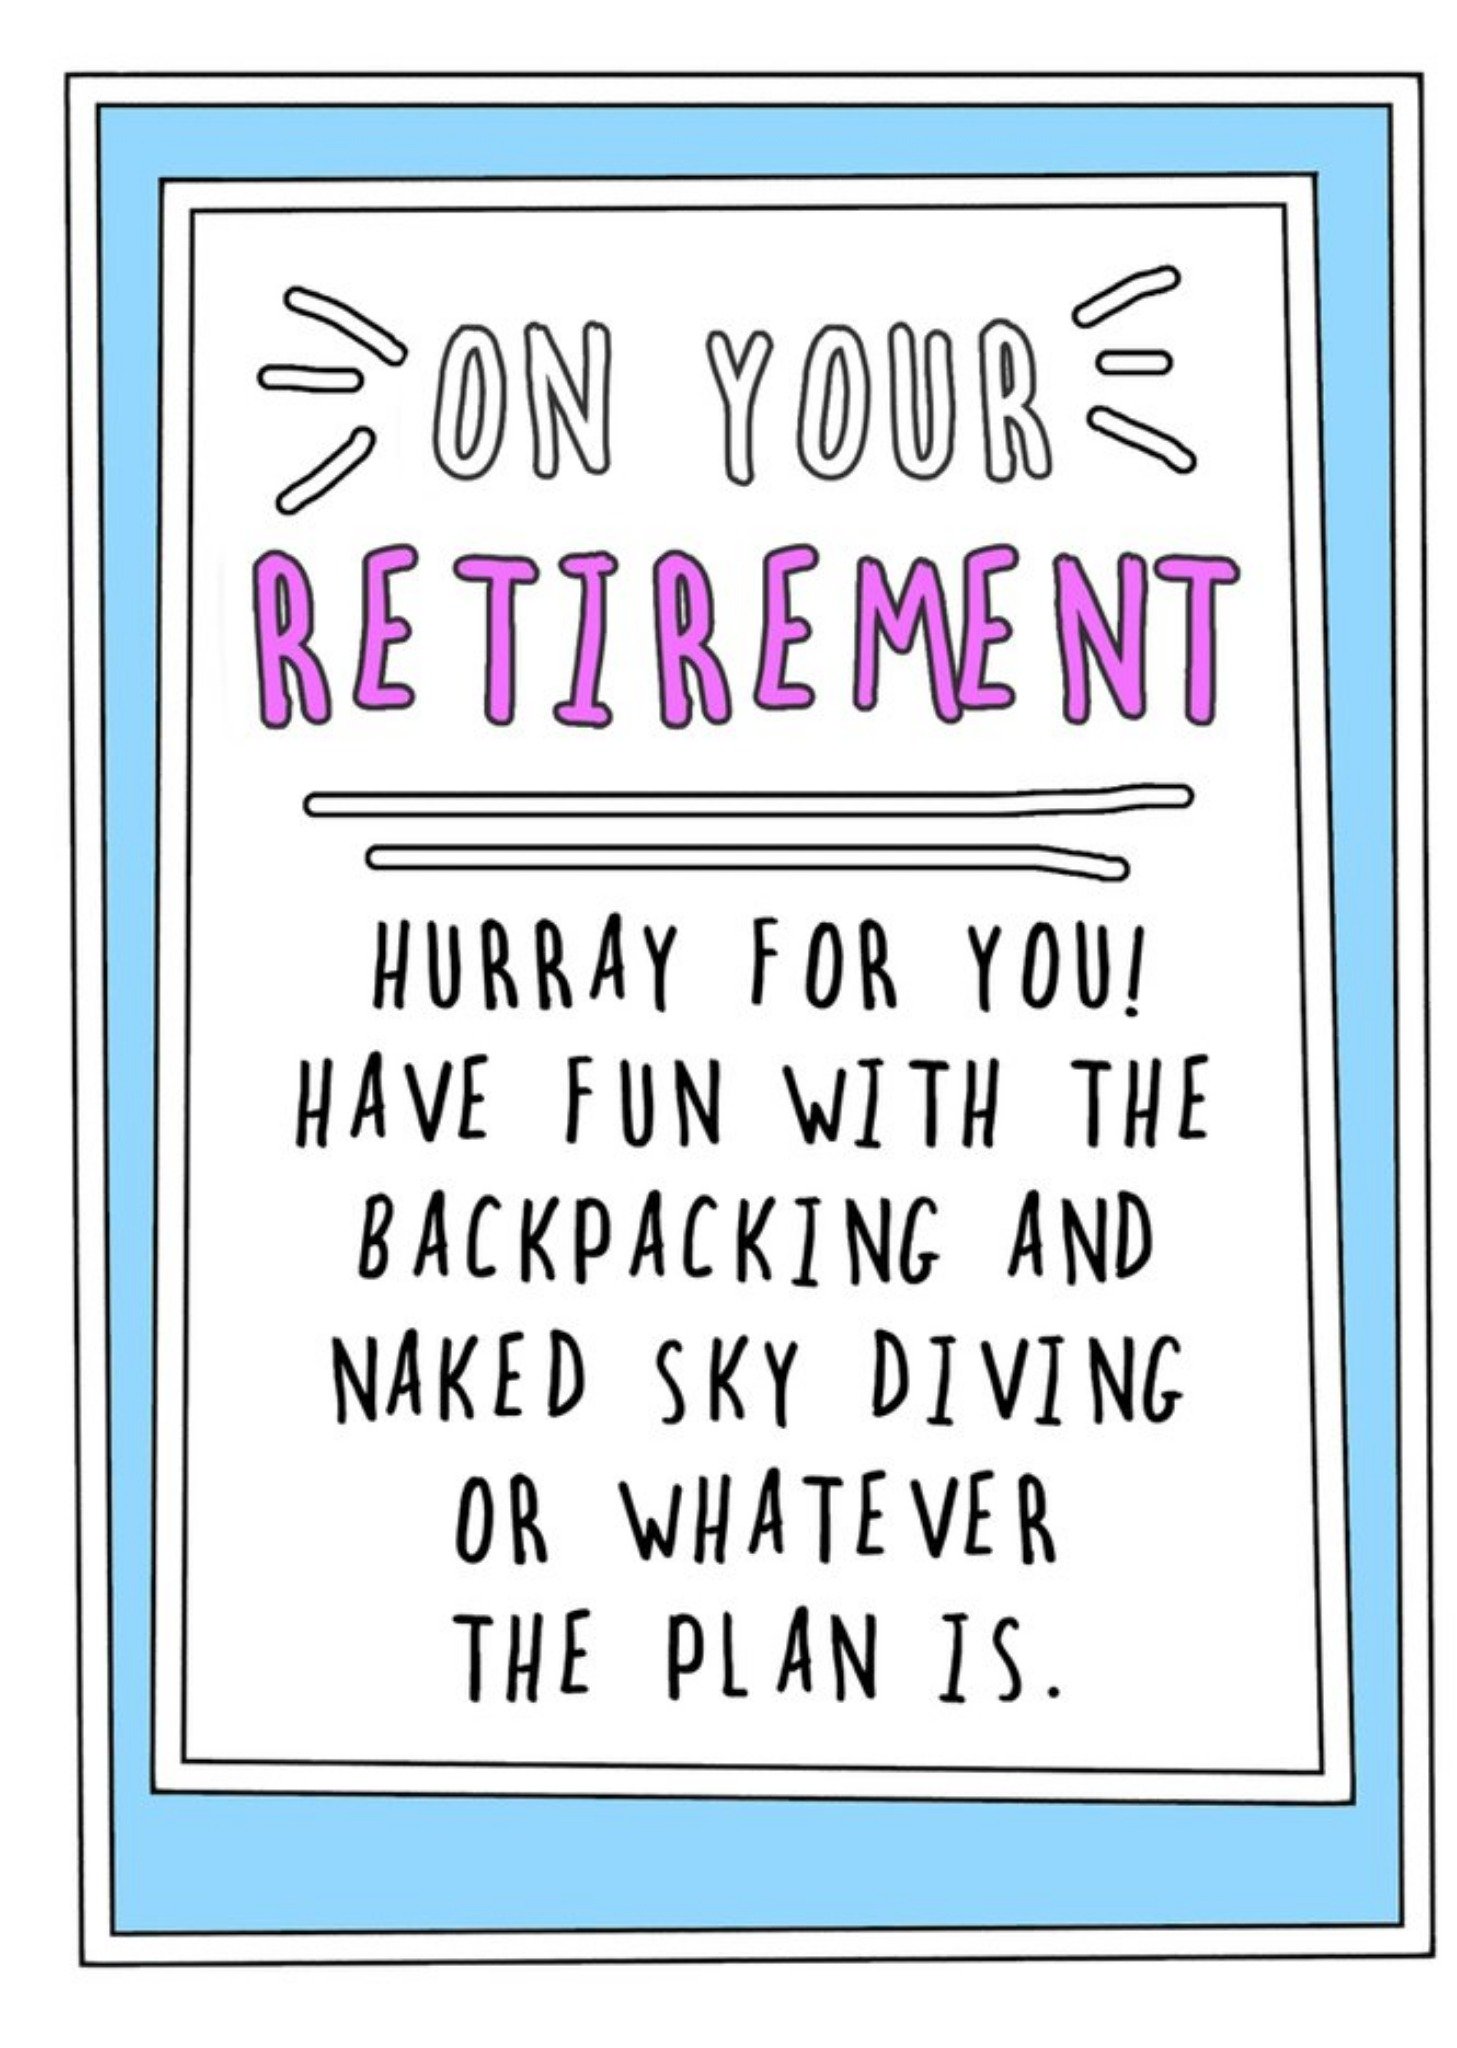 Go La La Funny Cheeky On Your Retirement Hurray For You Have Fun Card, Large